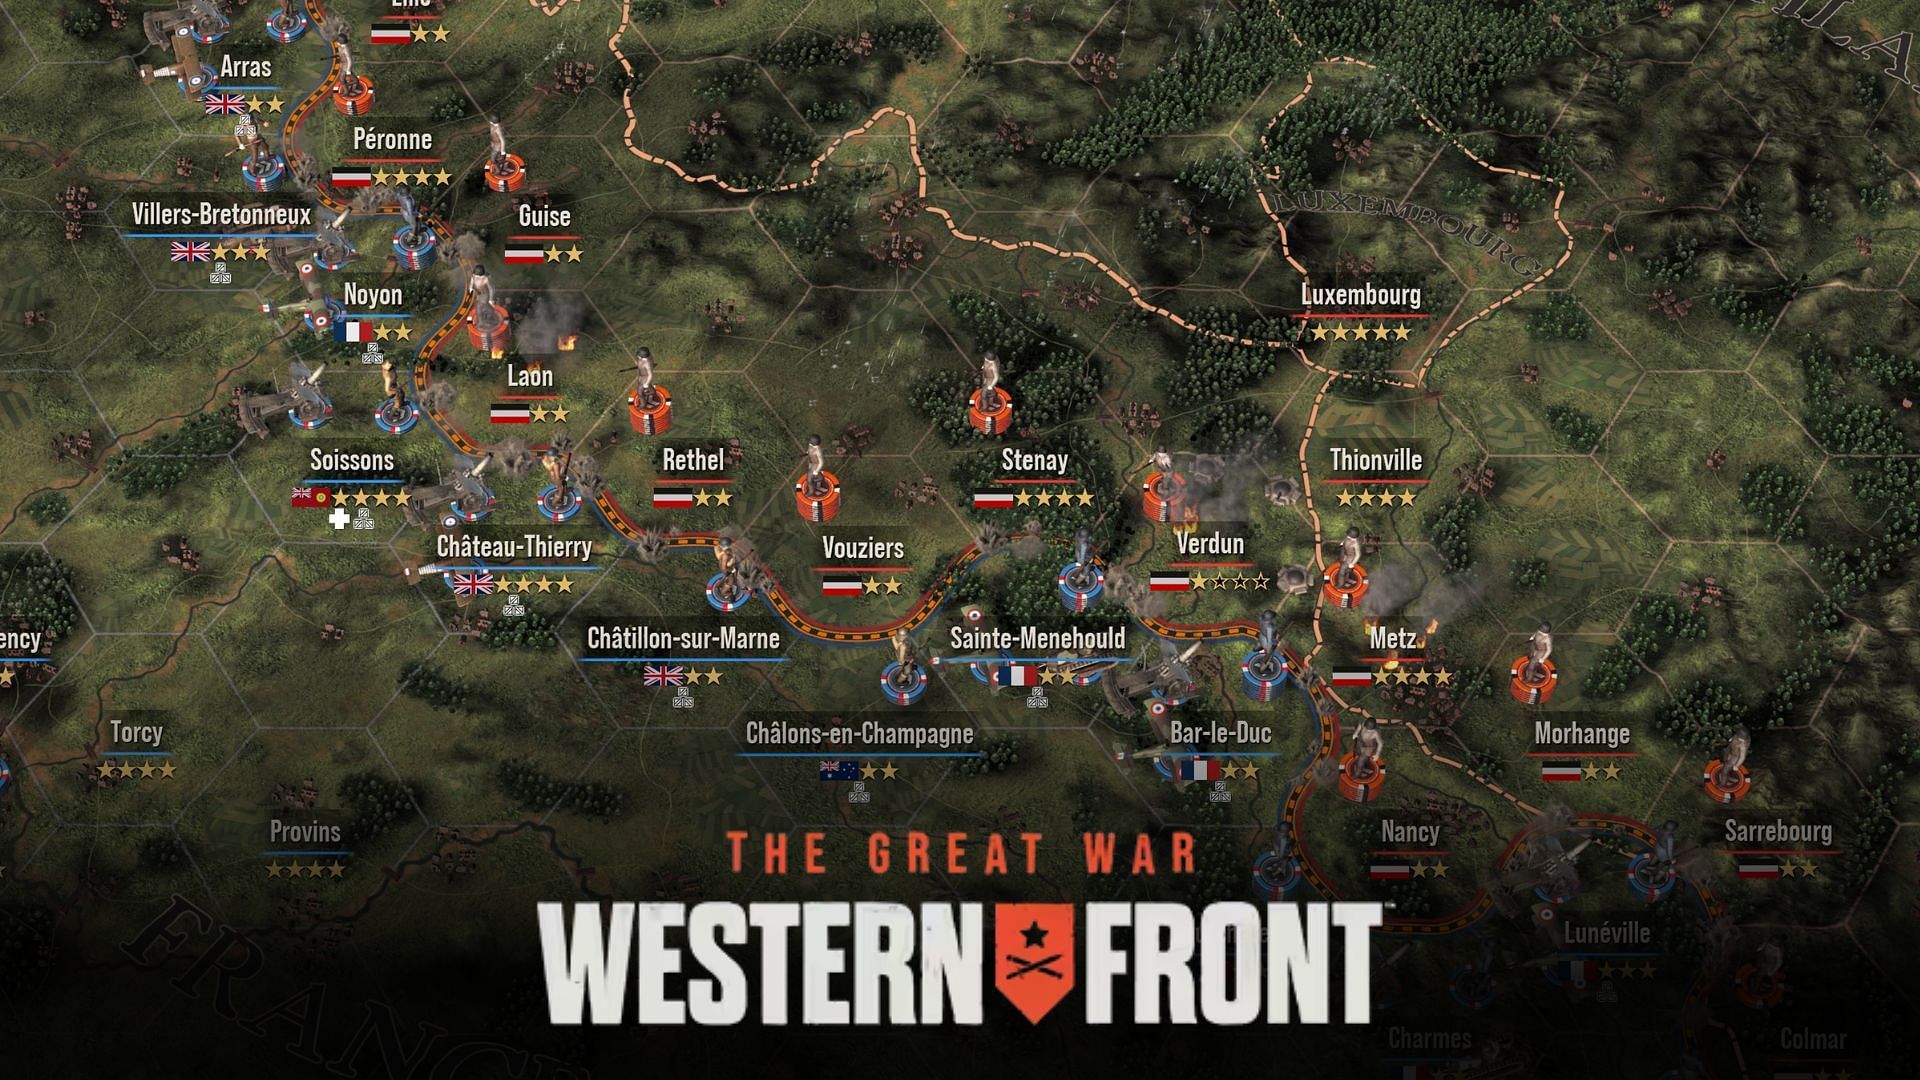 The Great War: Western Front Review (Image via Frontier Foundry/The Great War: Western Front)